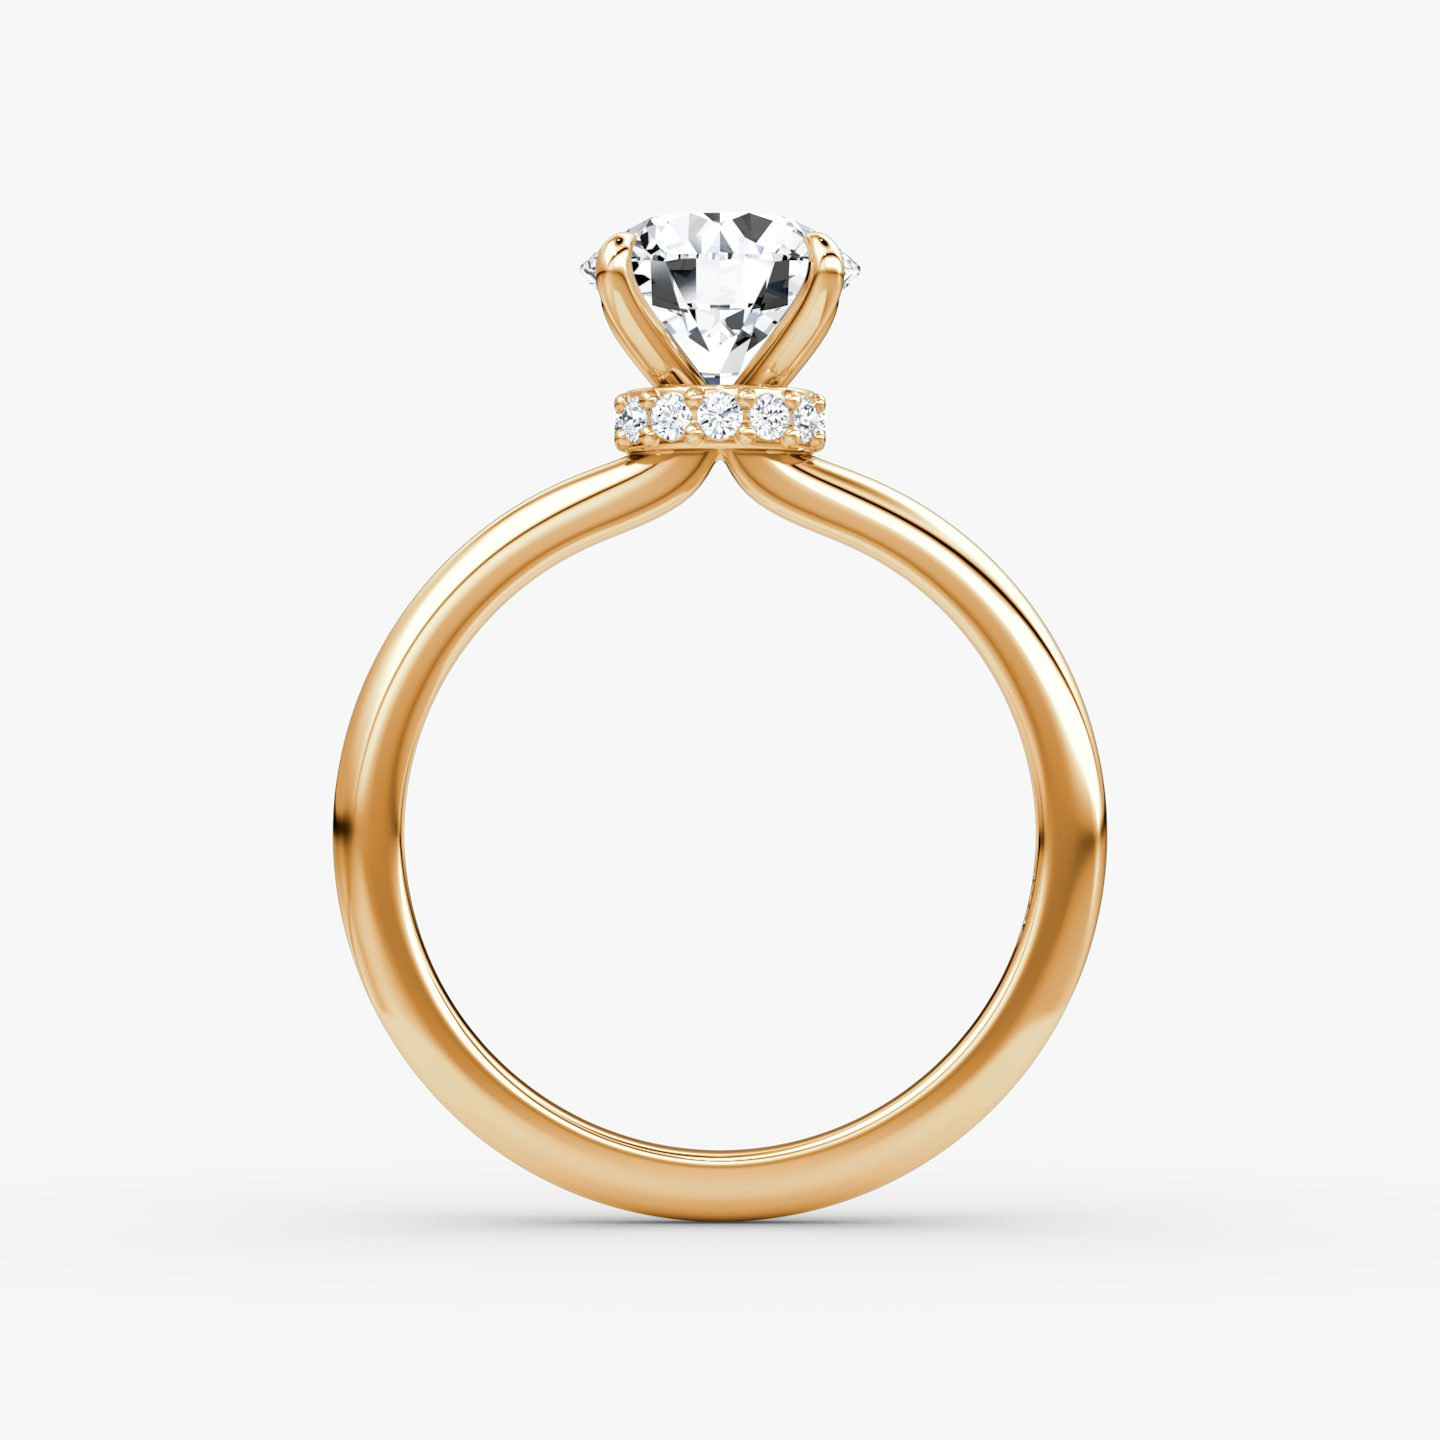 undefined | Rond Brillant | 14k | Or rose | bandAccent: Simple | caratWeight: other | diamondOrientation: vertical